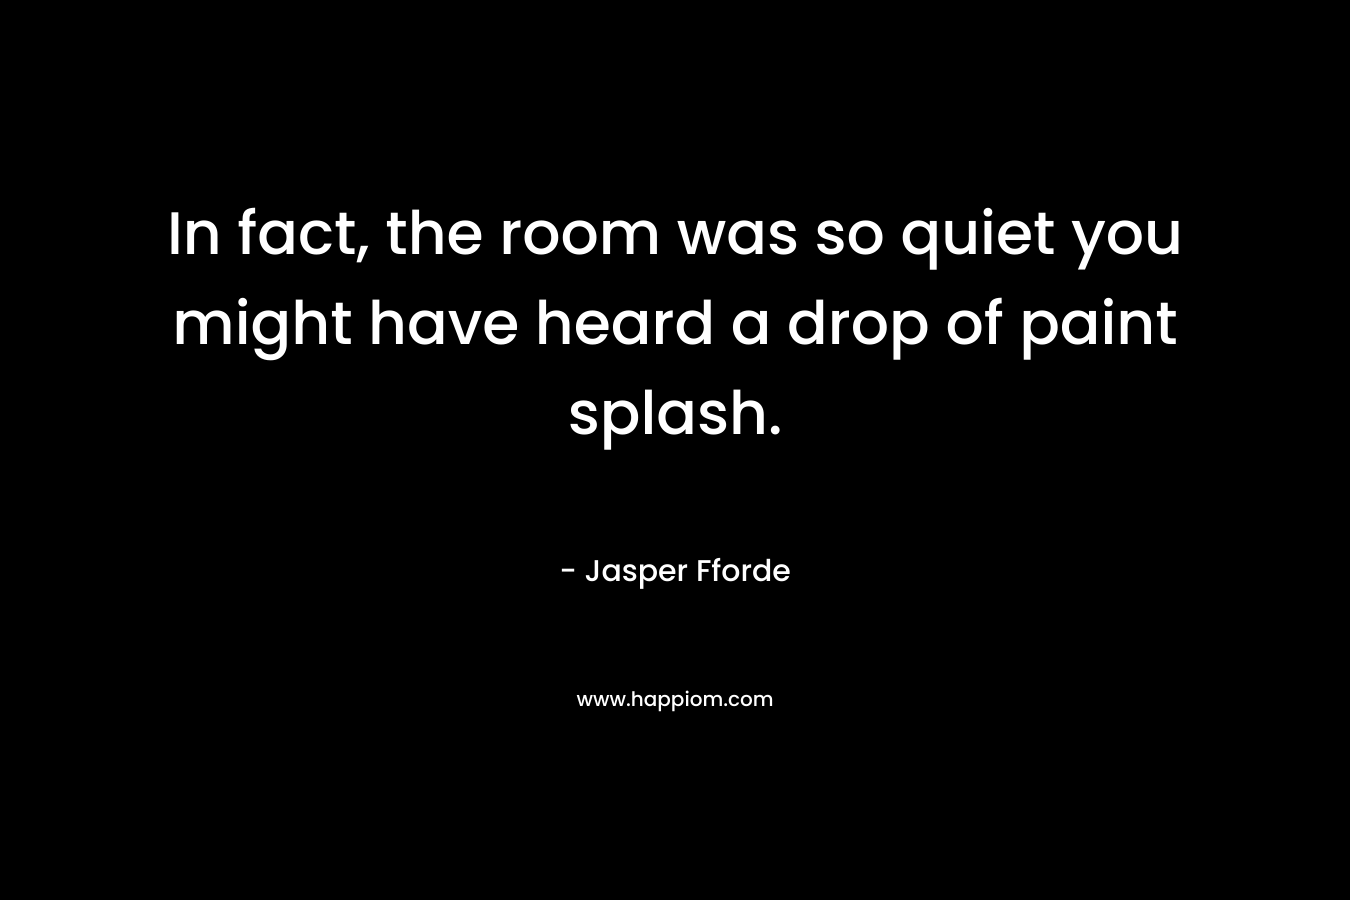 In fact, the room was so quiet you might have heard a drop of paint splash.